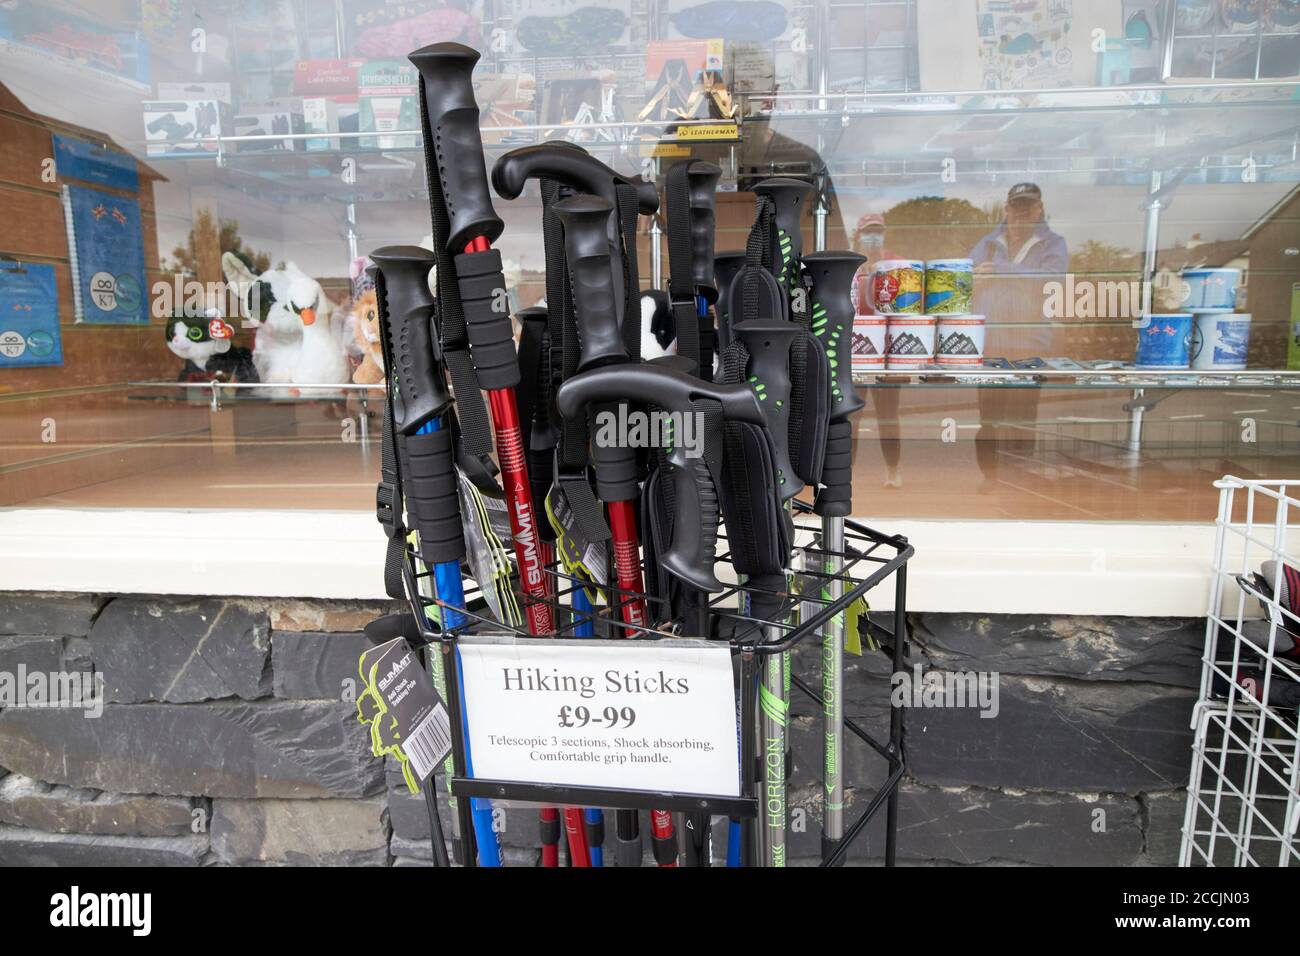 hiking sticks for sale outside a shop in coniston lake district, cumbria, england, uk Stock Photo